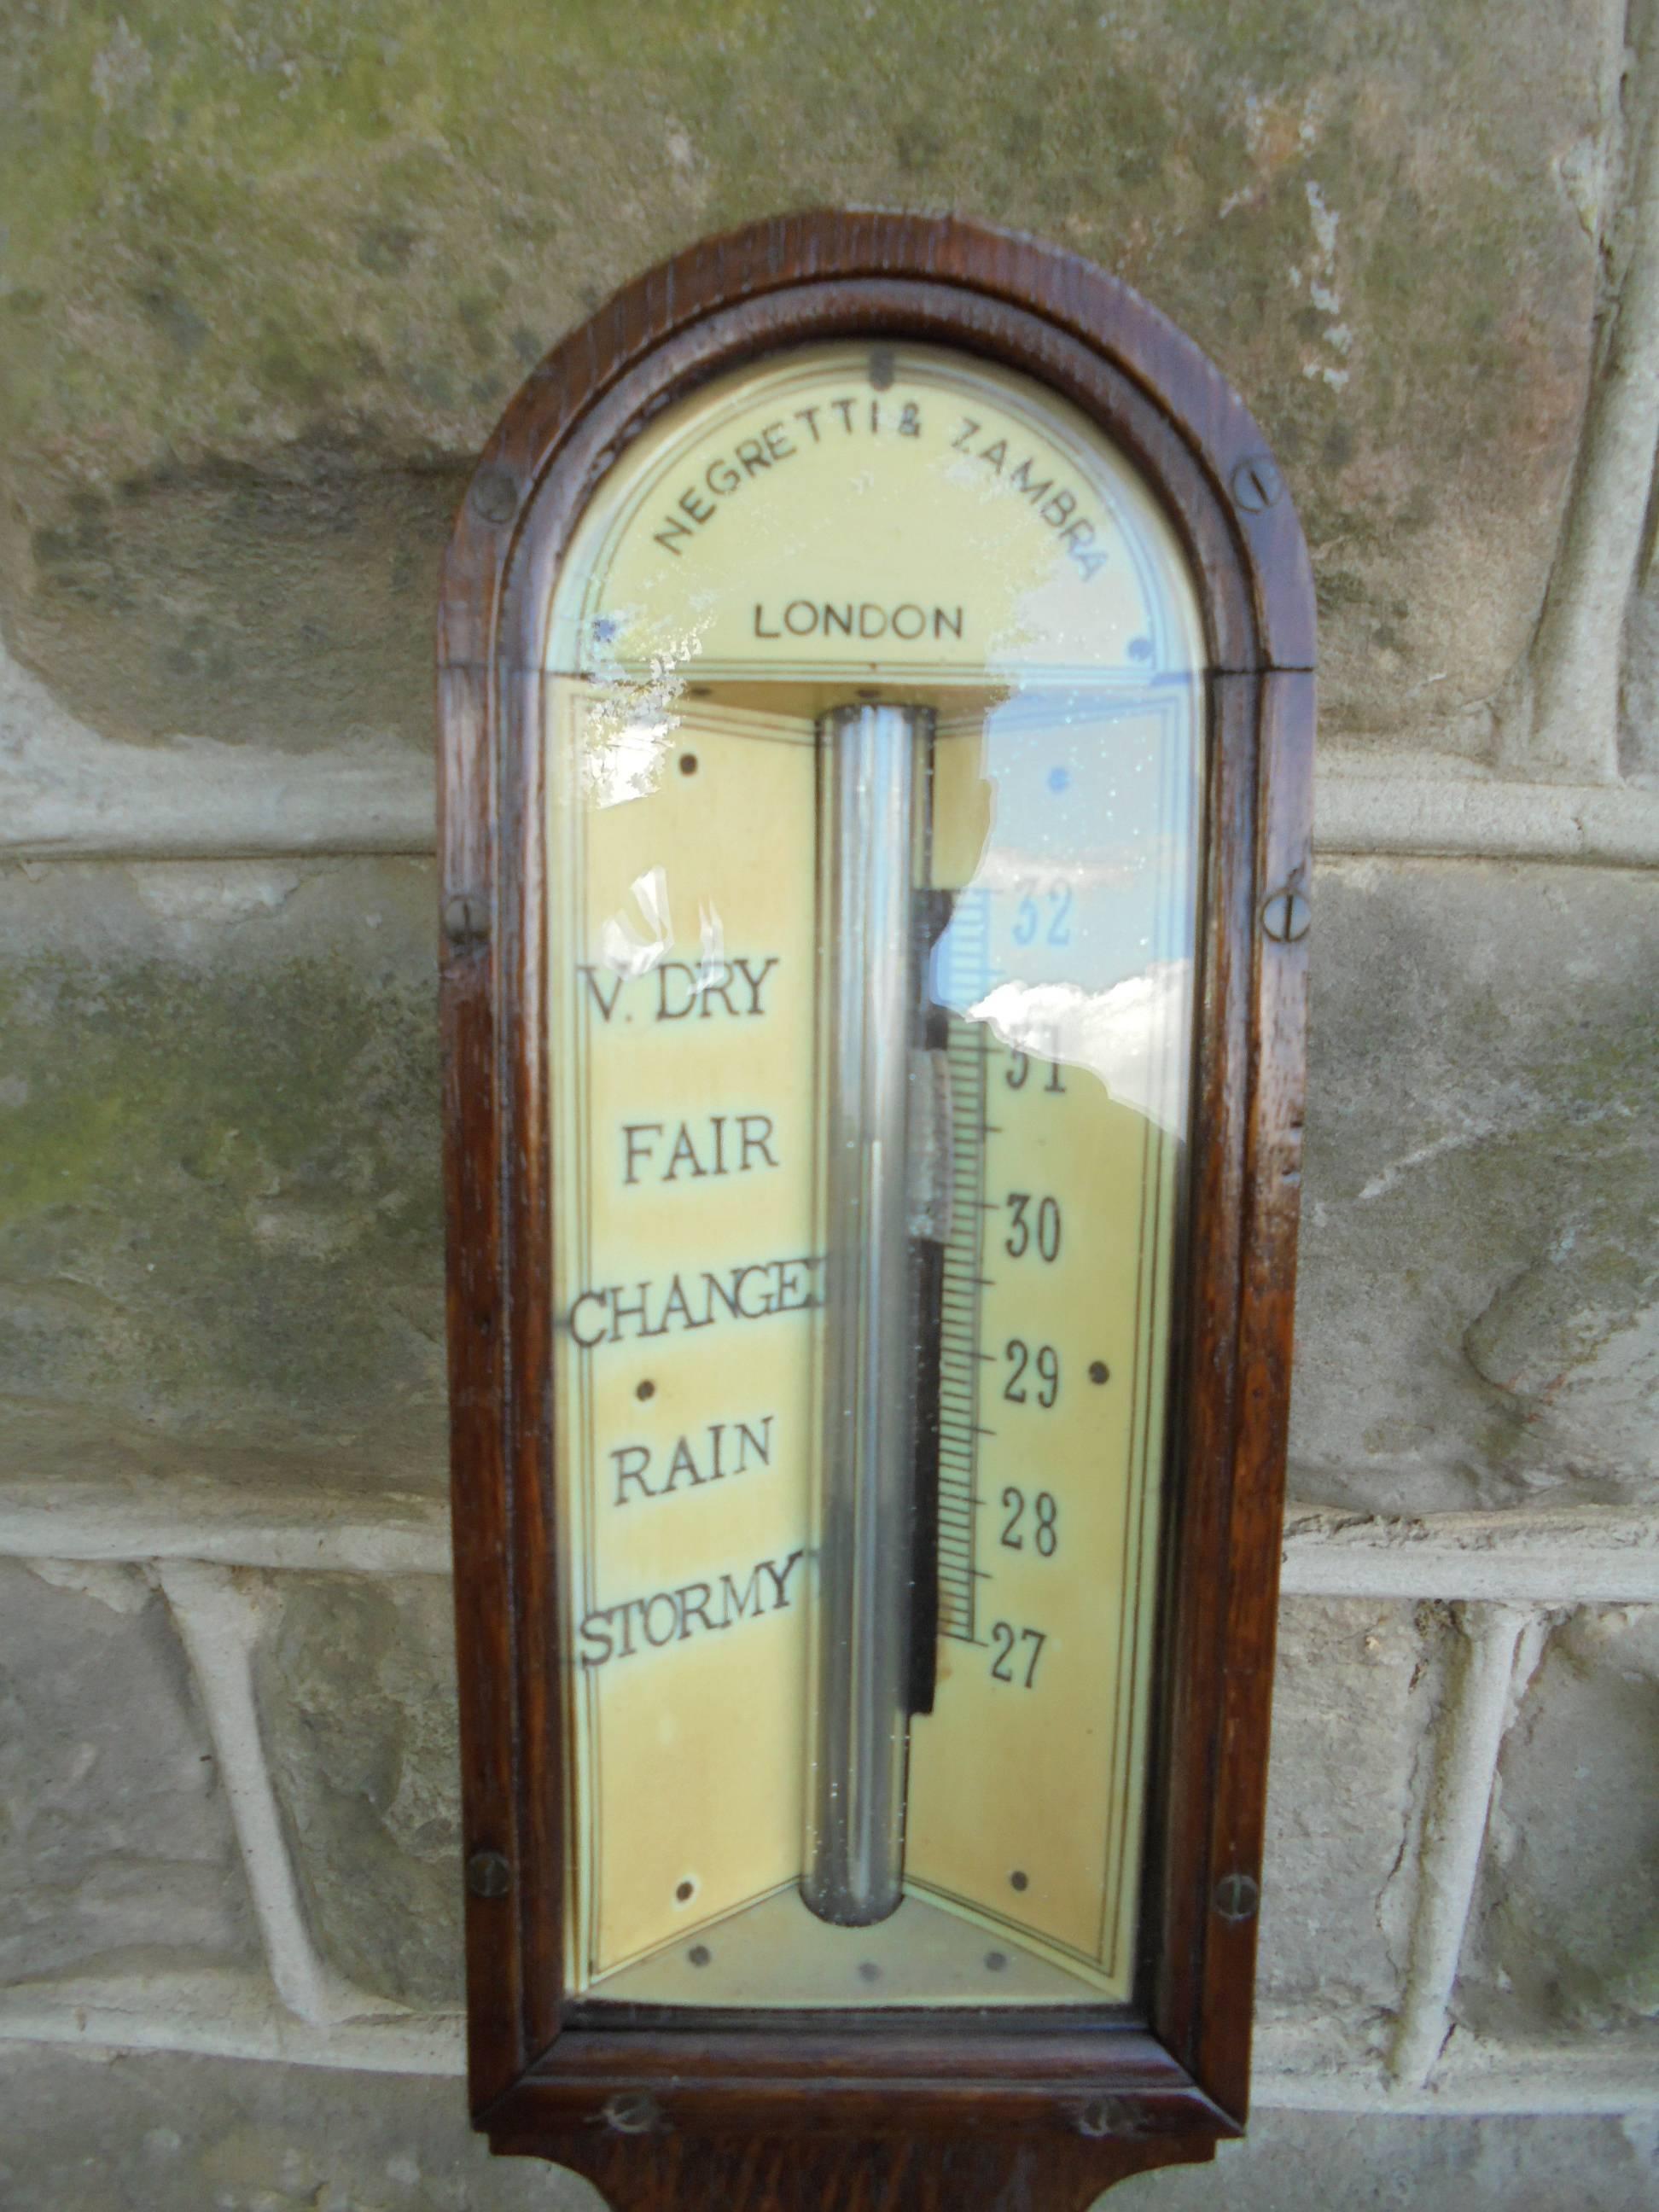 Offered for sale is this antique oak stick barometer.

Oak case with ivory dial signed Negretti and Zambra London. Cased ivory thermometer. Wooden knob scale turners. 

The oak case is in nice clean condition. Good working condition

Measures: